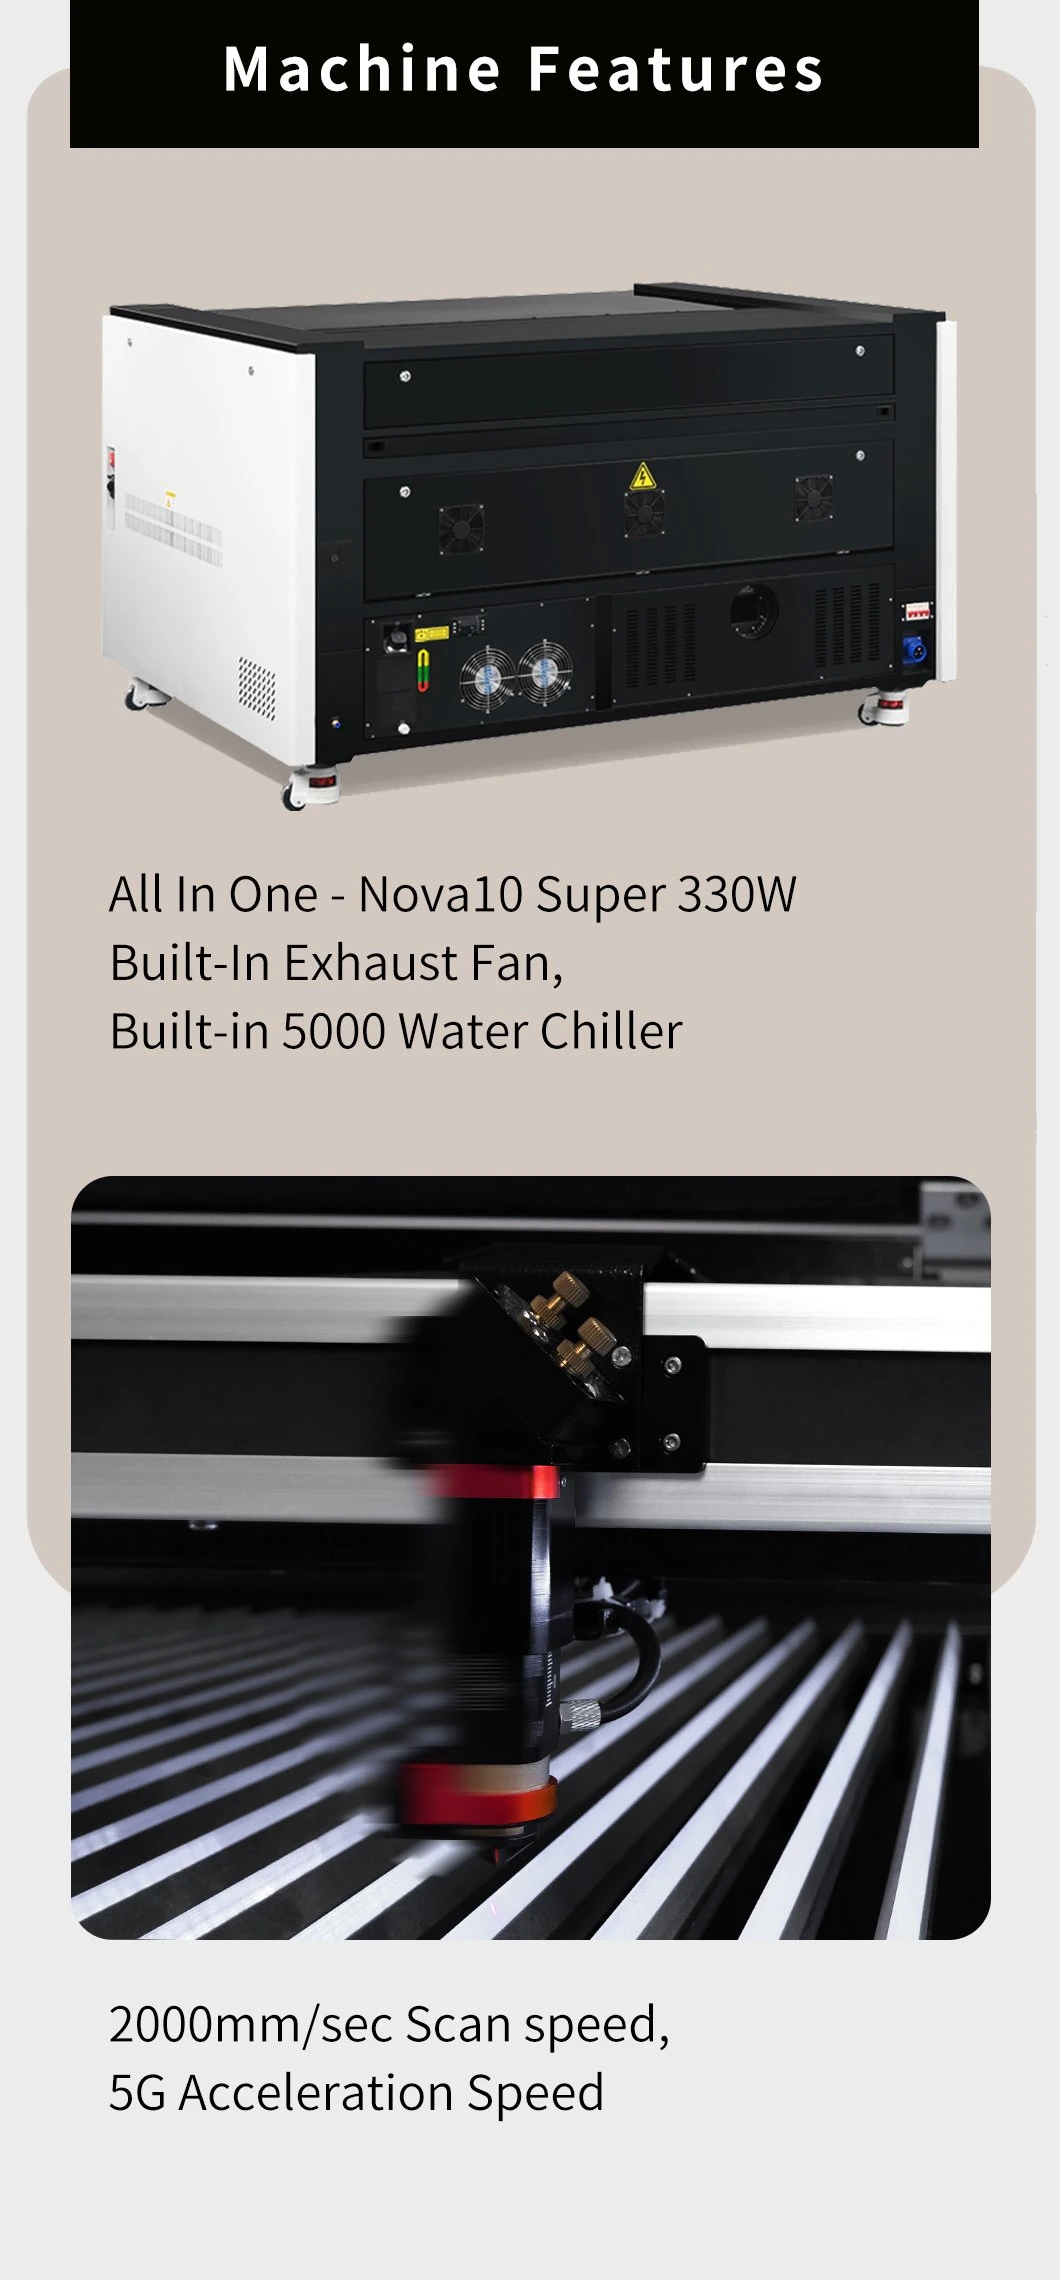 Newest Continuous Laser 80W 100W RF30W/60W 1070 Etcher Laser for Acrylic Glass Leather with Integrated Autofocus WiFi Lightburn Software